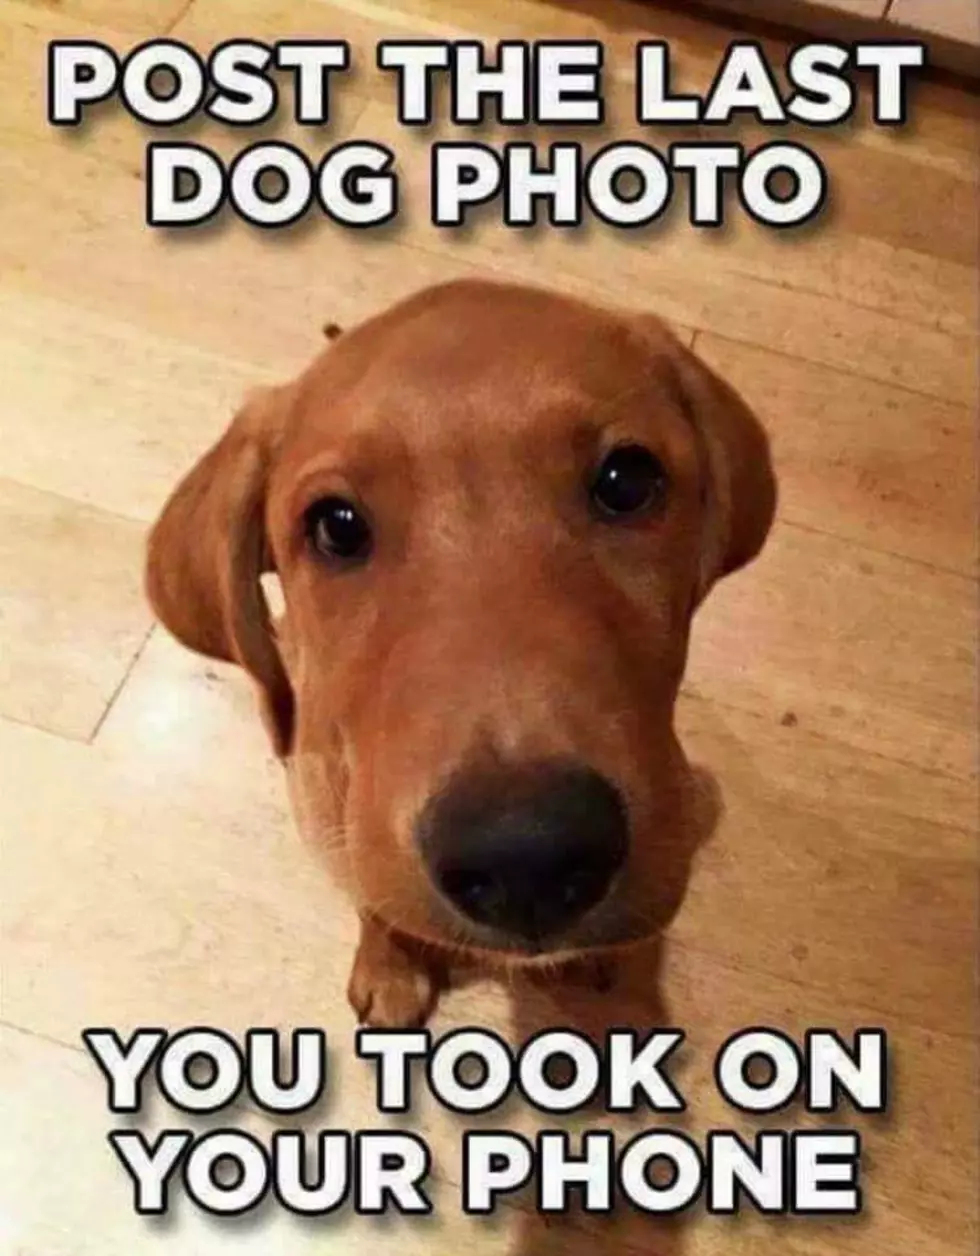 How Many Pics of Your Pup are on Your Phone